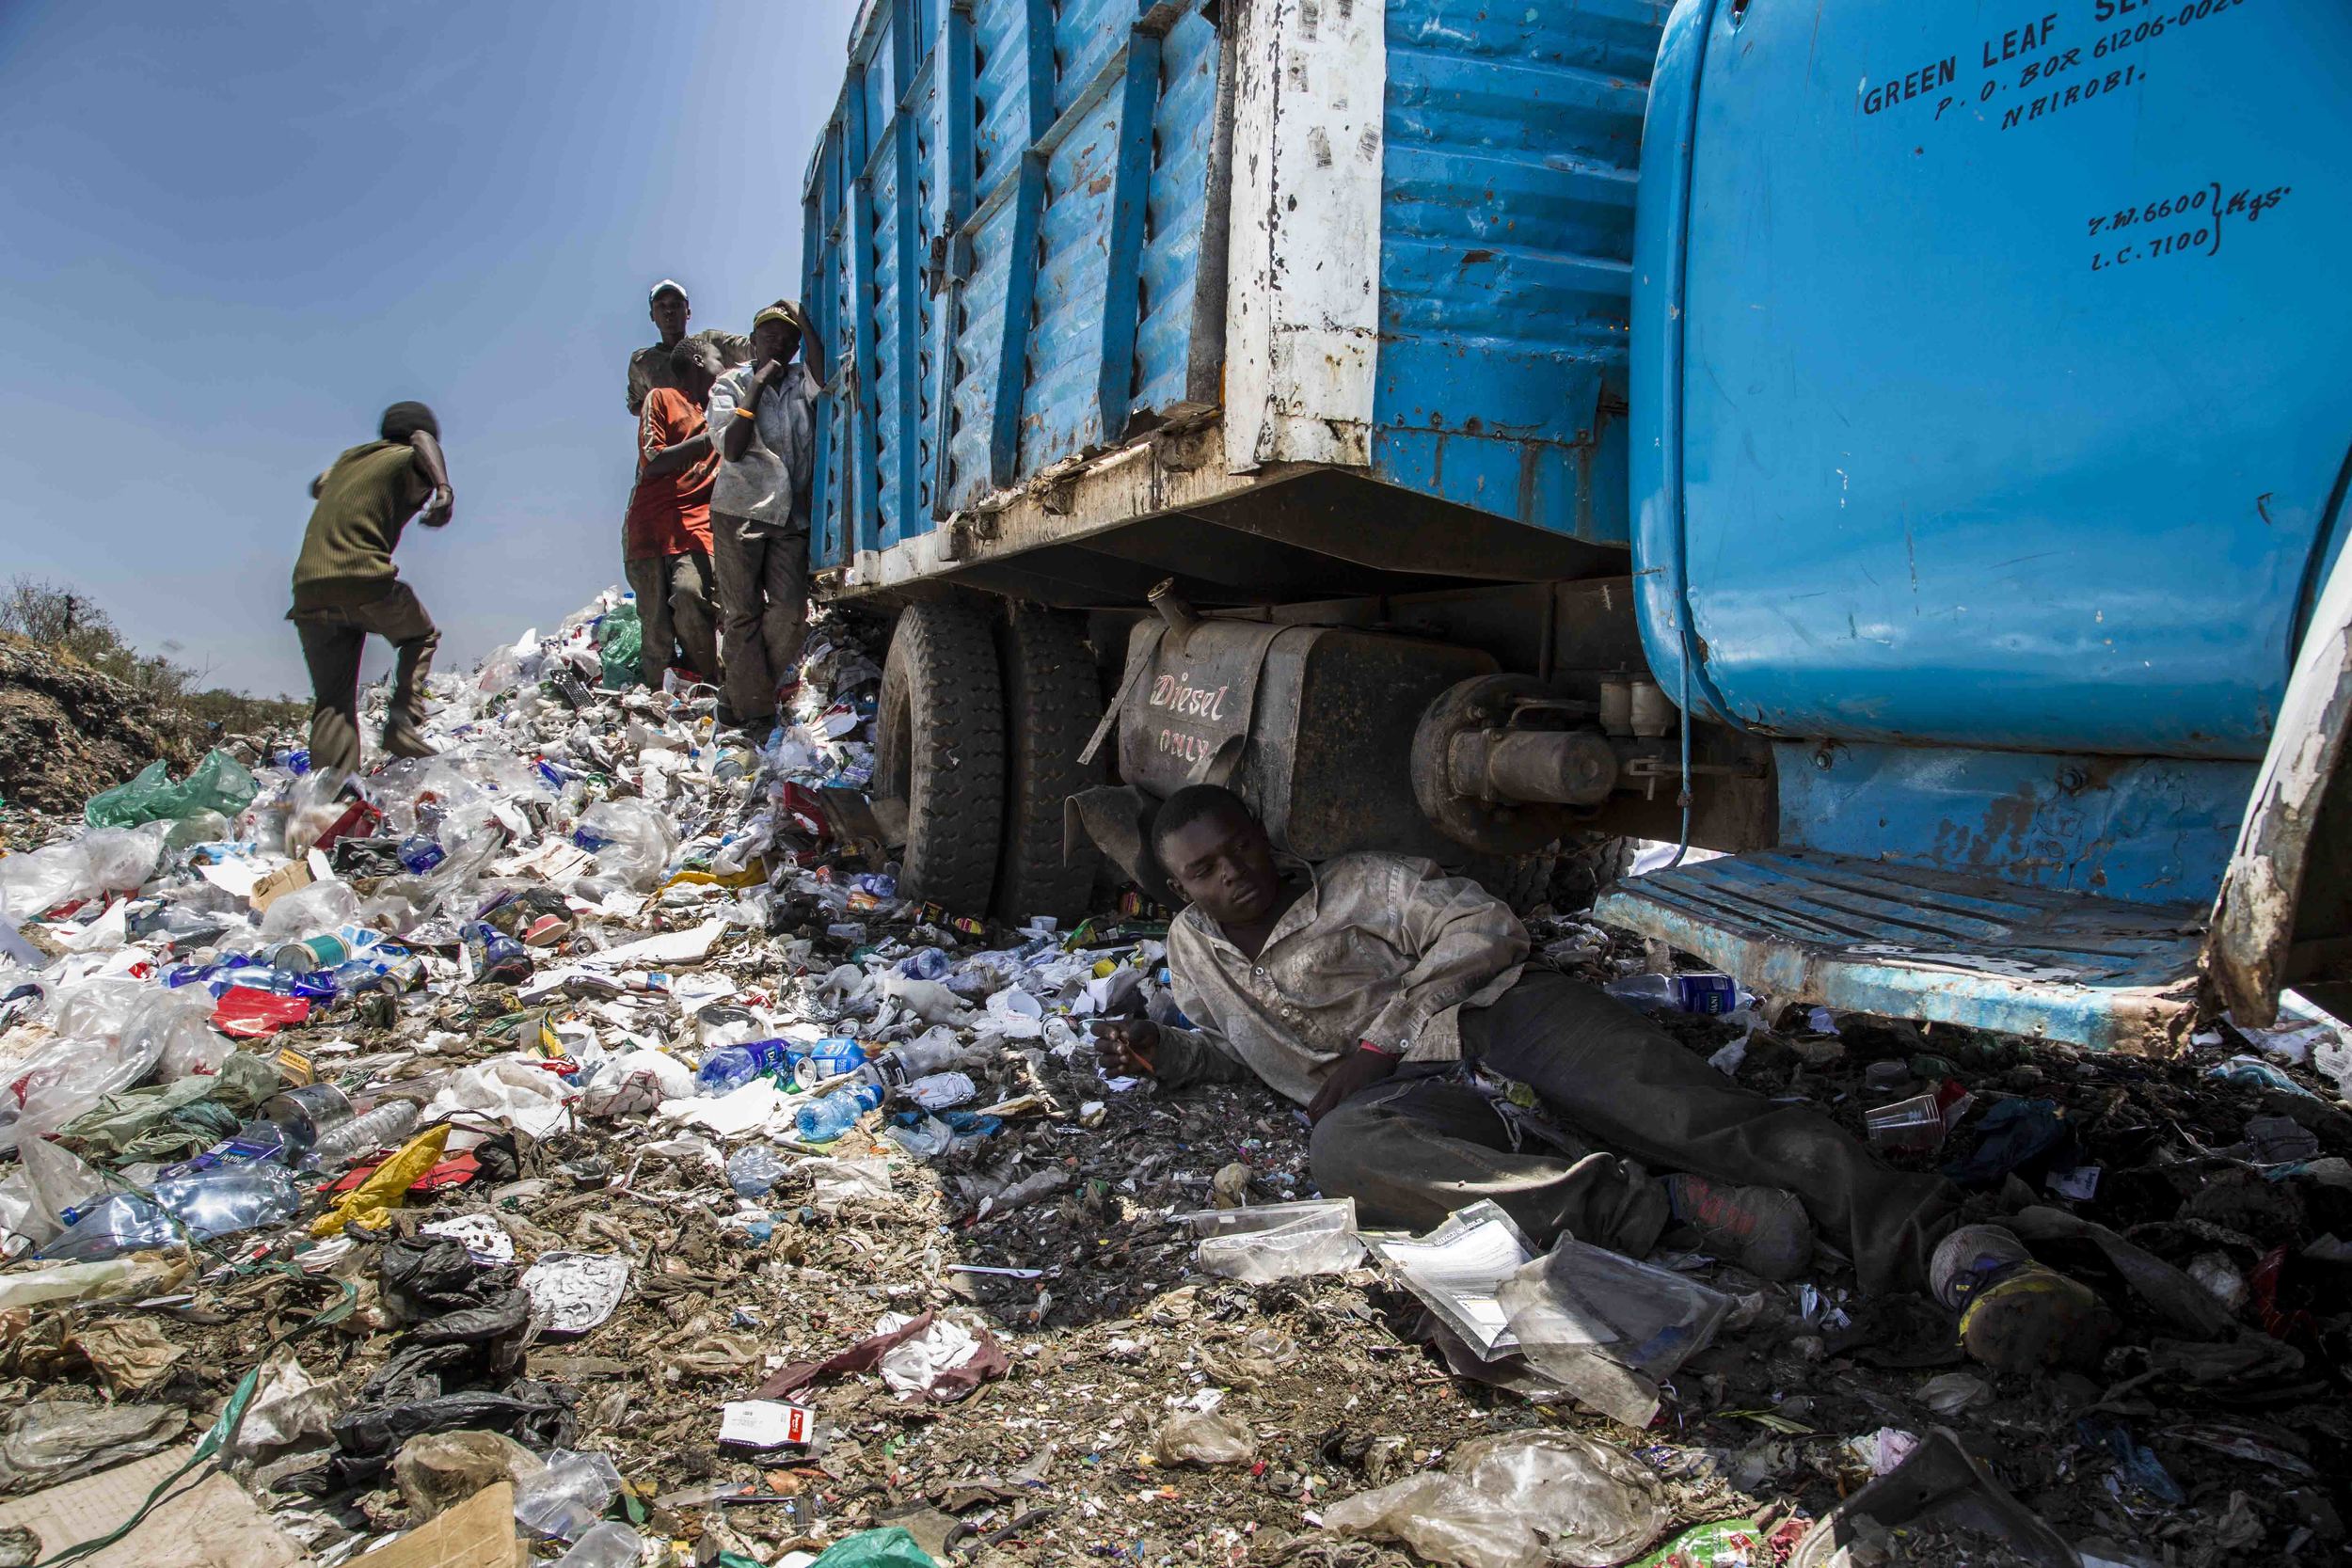  Mike Njuguna, 17 catches some shade while breaking from collecting plastics at the Dandora Dumpsite. 